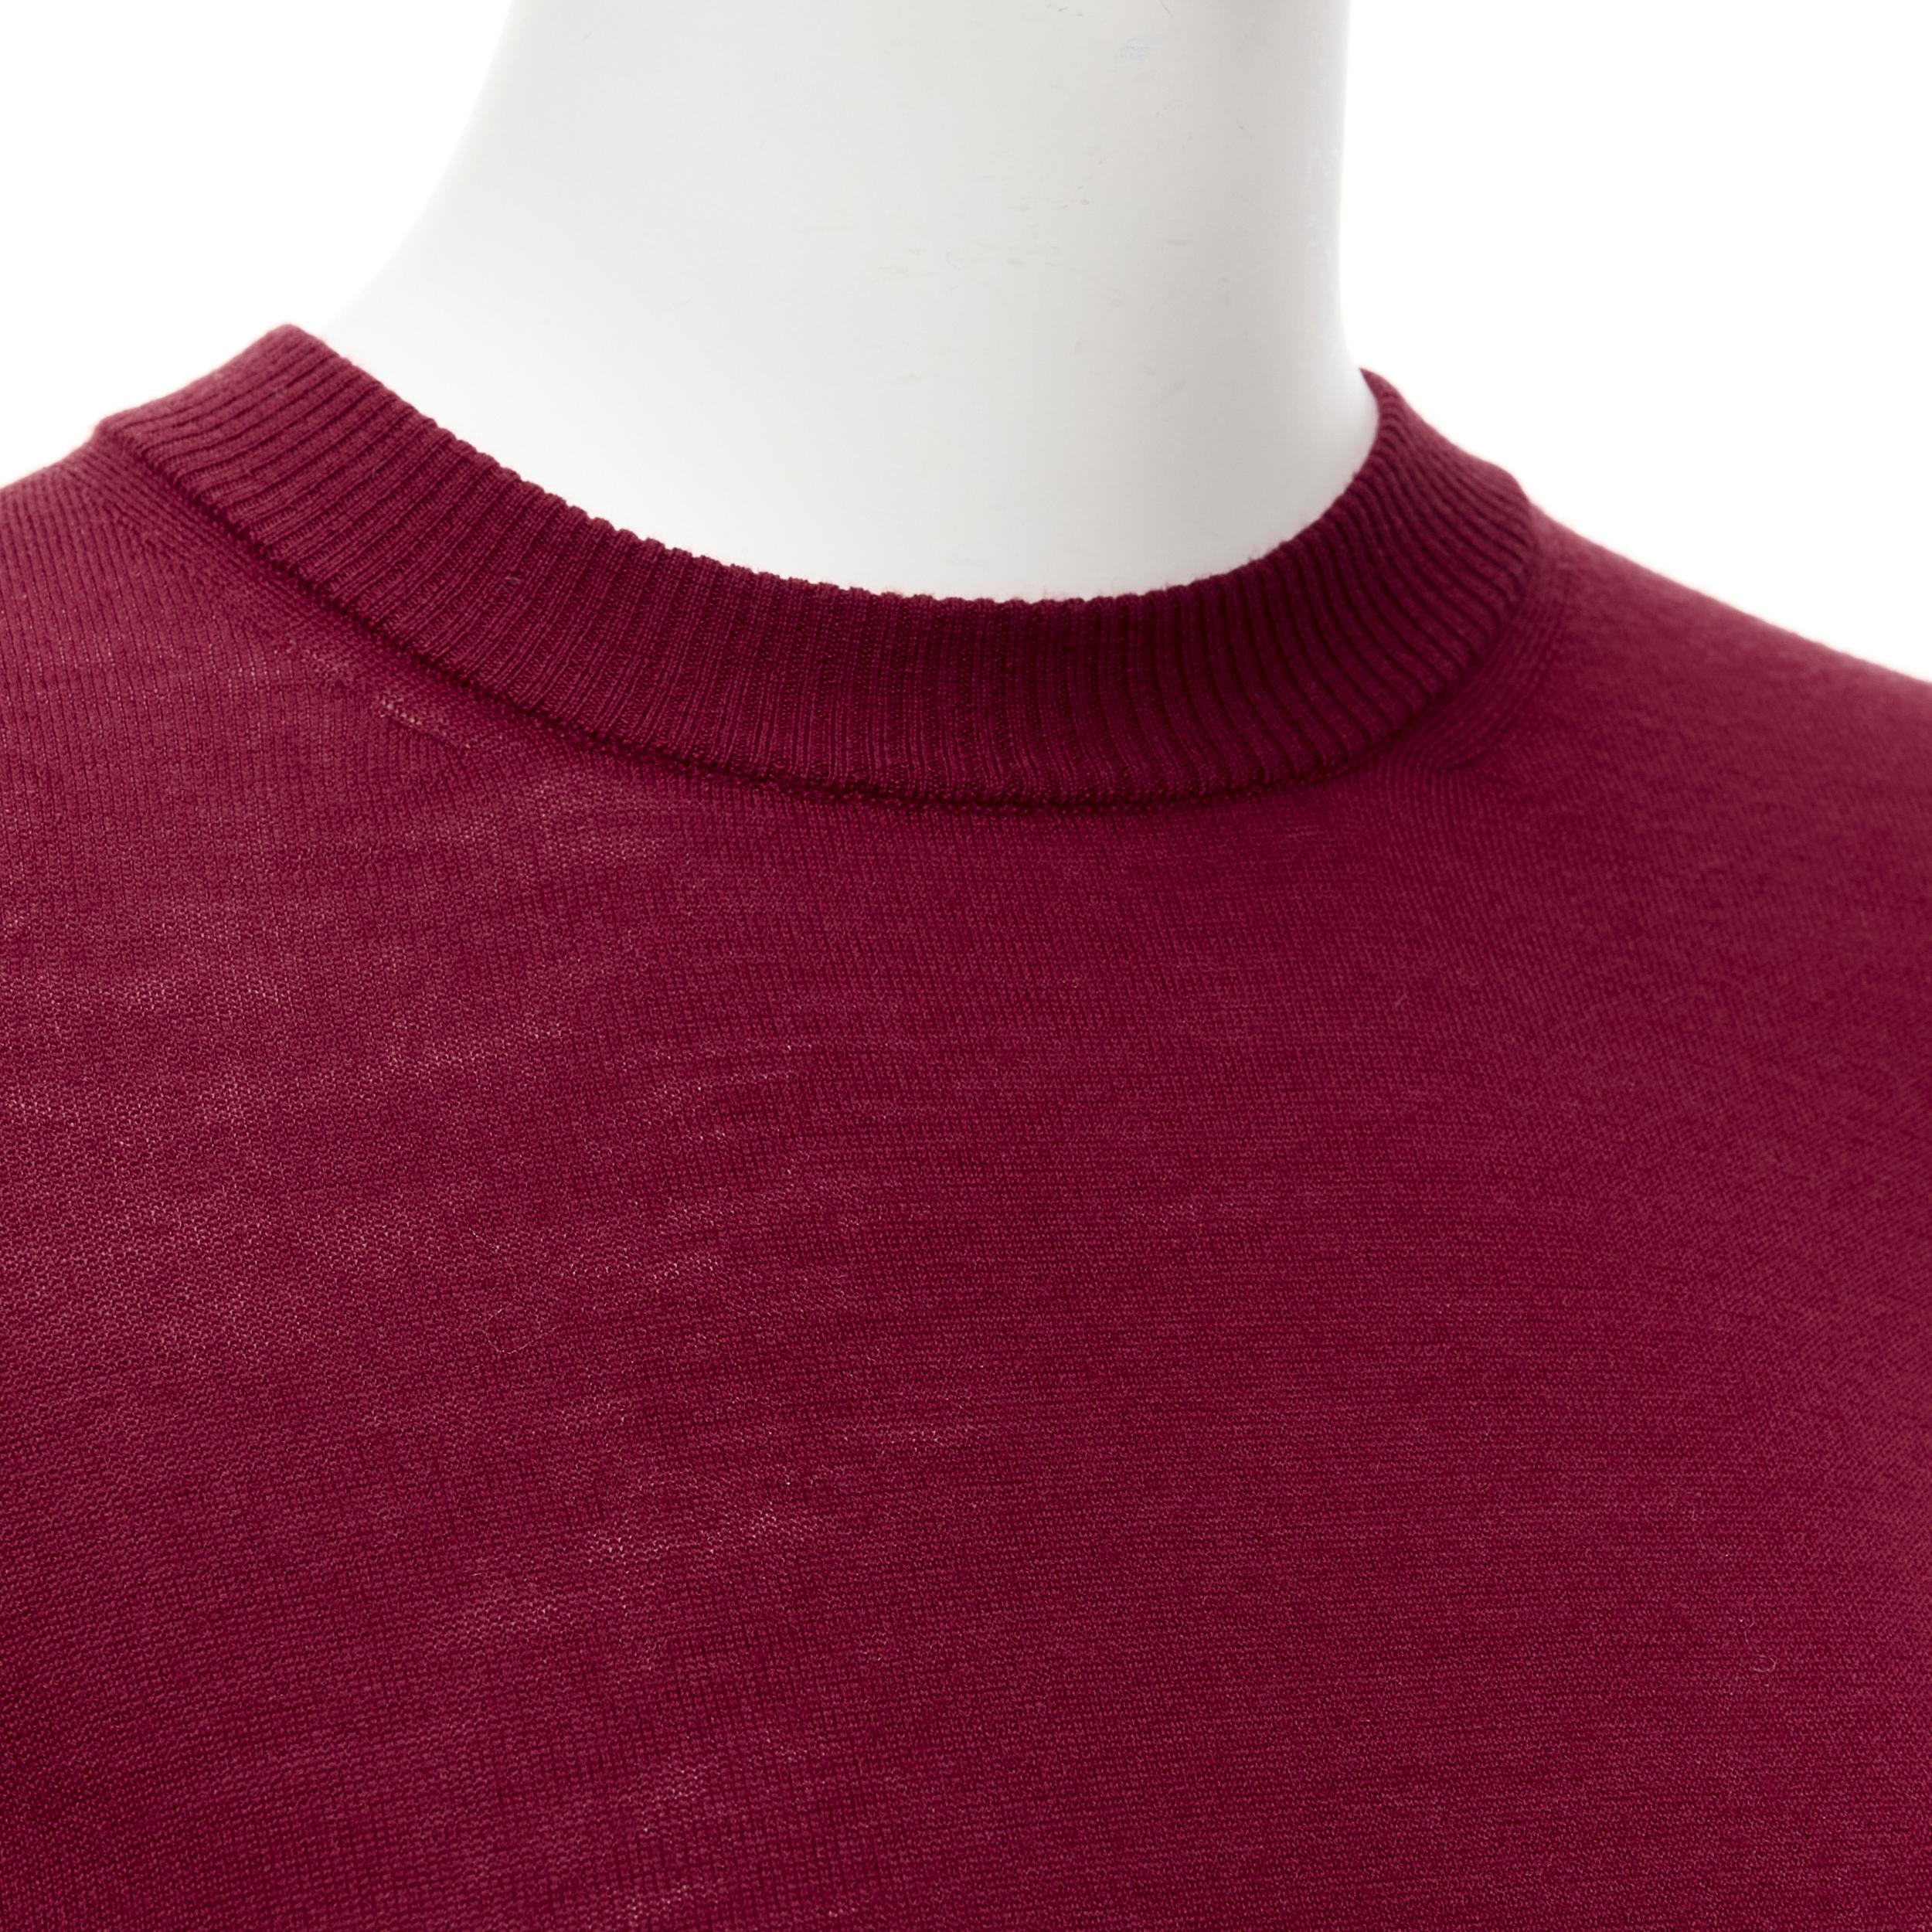 ALAIA 100% virgin wool dark red long sleeve crew neck sweater FR36 S
Reference: AAWC/A01099
Brand: Alaia
Material: Virgin Wool
Color: Red
Pattern: Solid
Closure: Pullover

CONDITION:
Condition: Excellent, this item was pre-owned and is in excellent